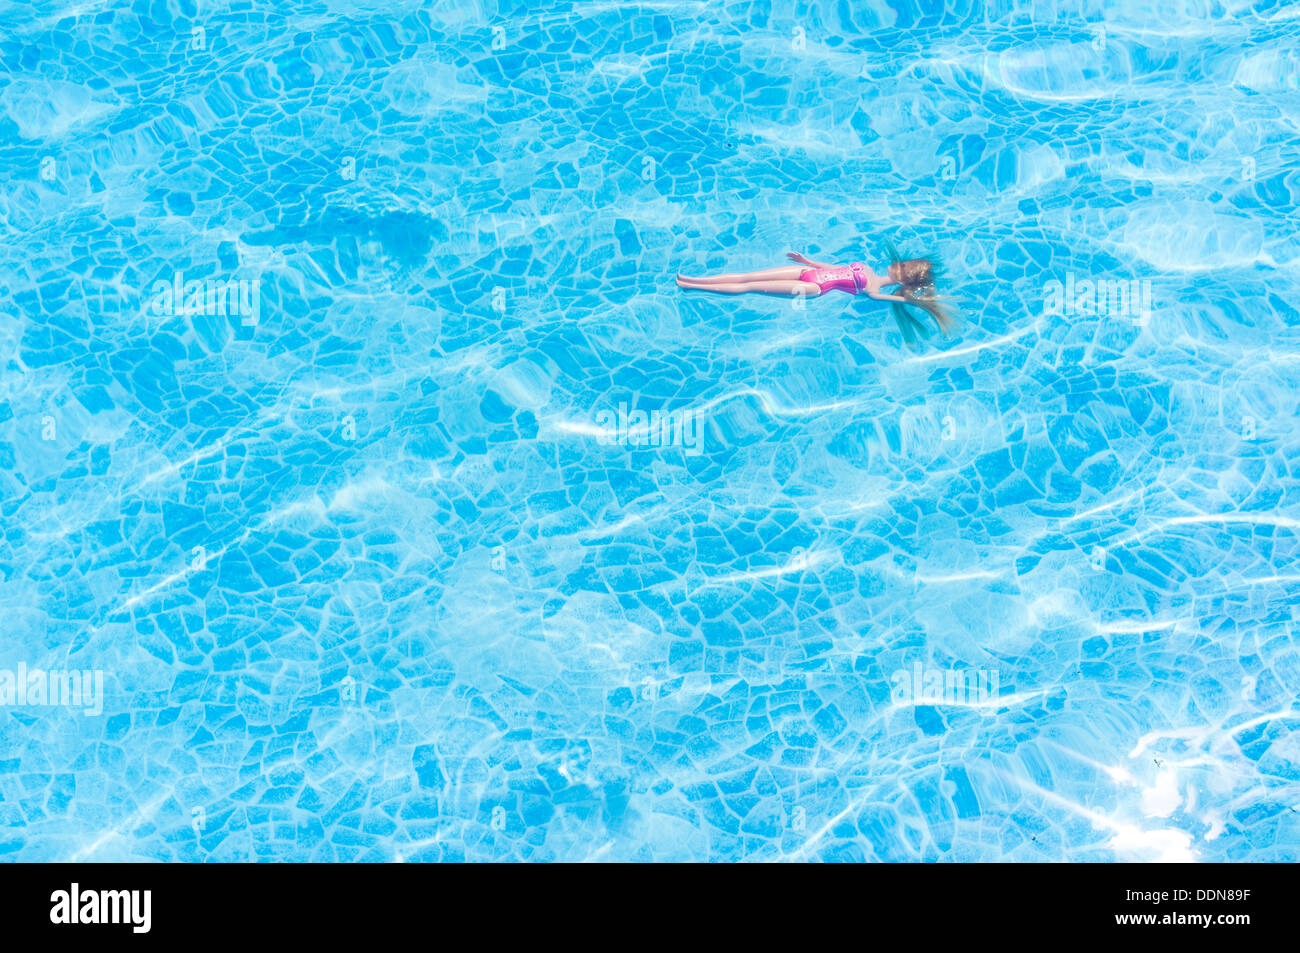 A toy figure doll in pink, floating in blue swimming pool in a sunny day Stock Photo